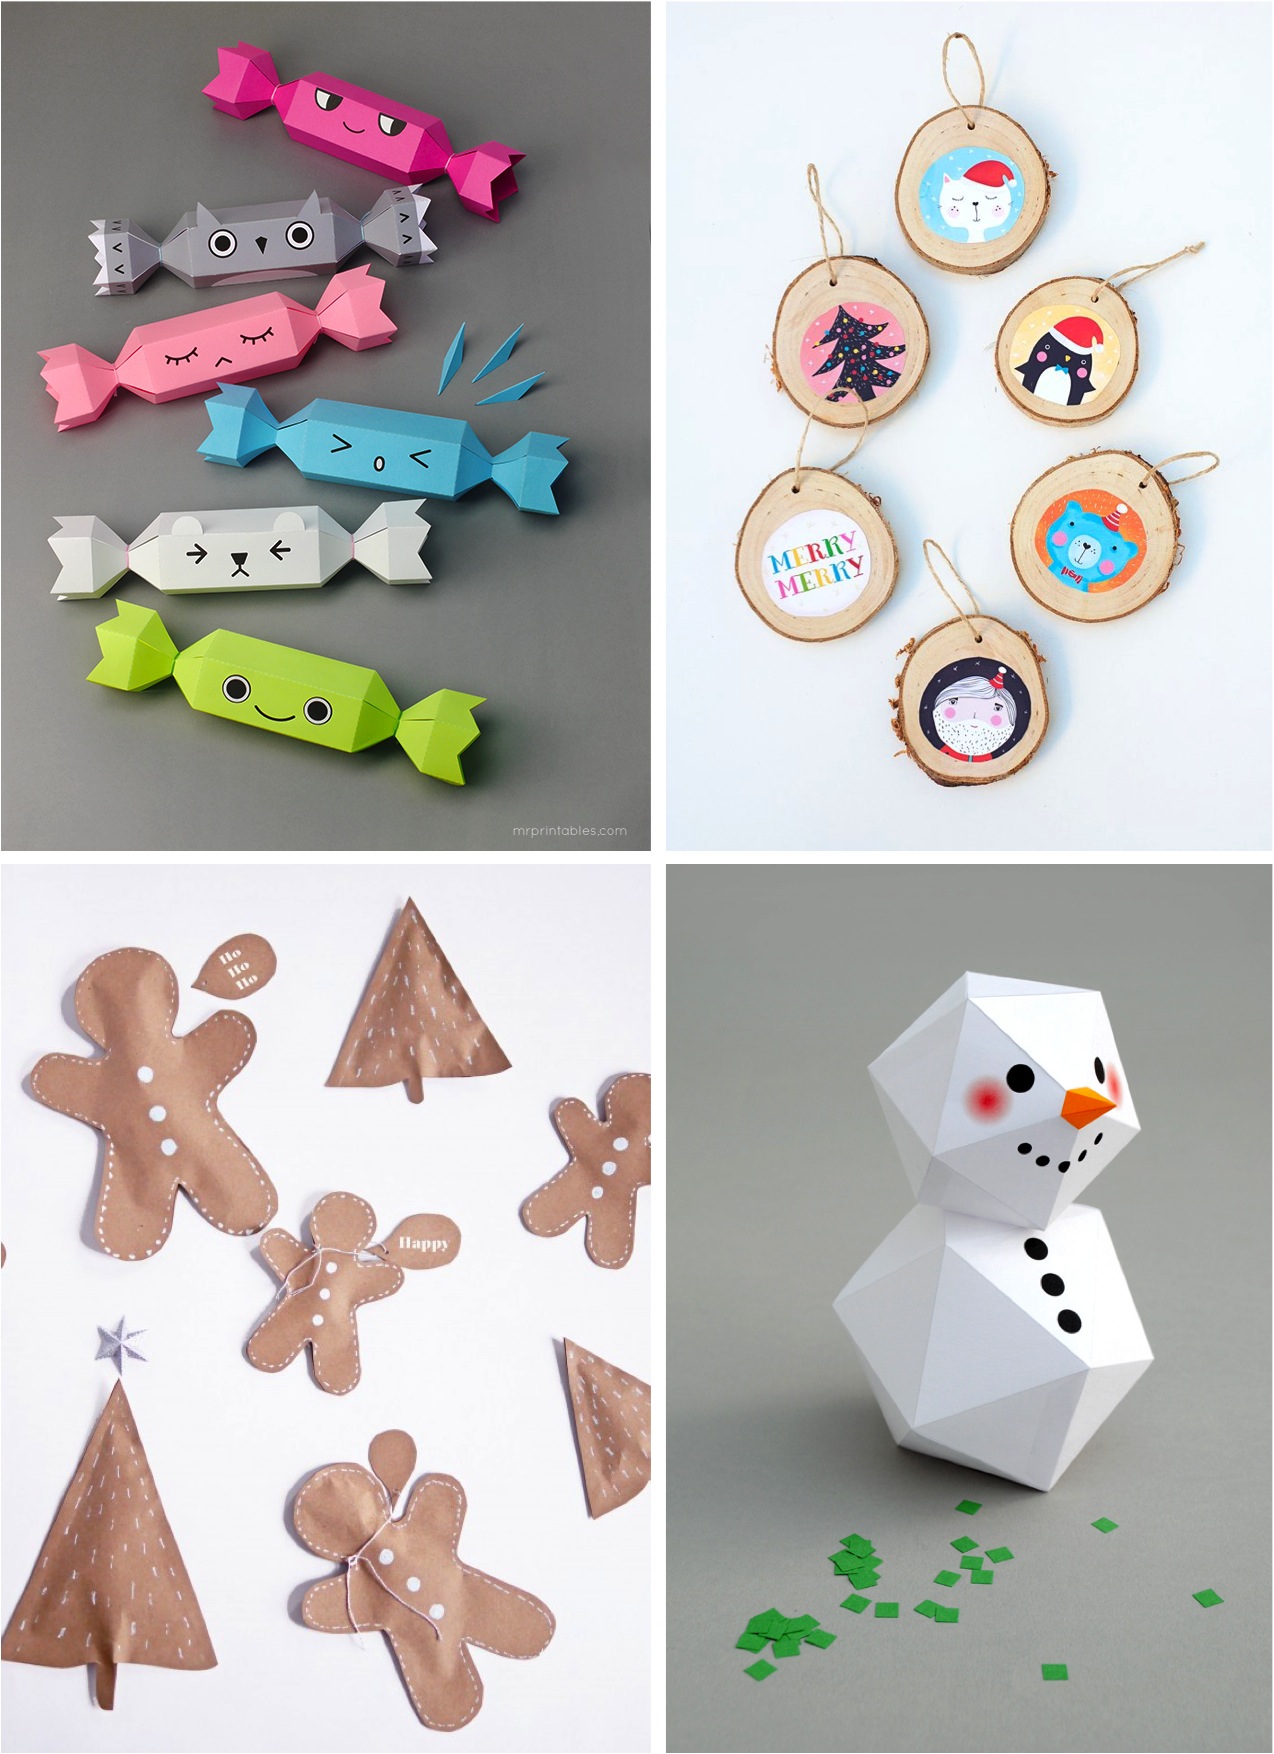 "four easy Christmas crafts for kids"